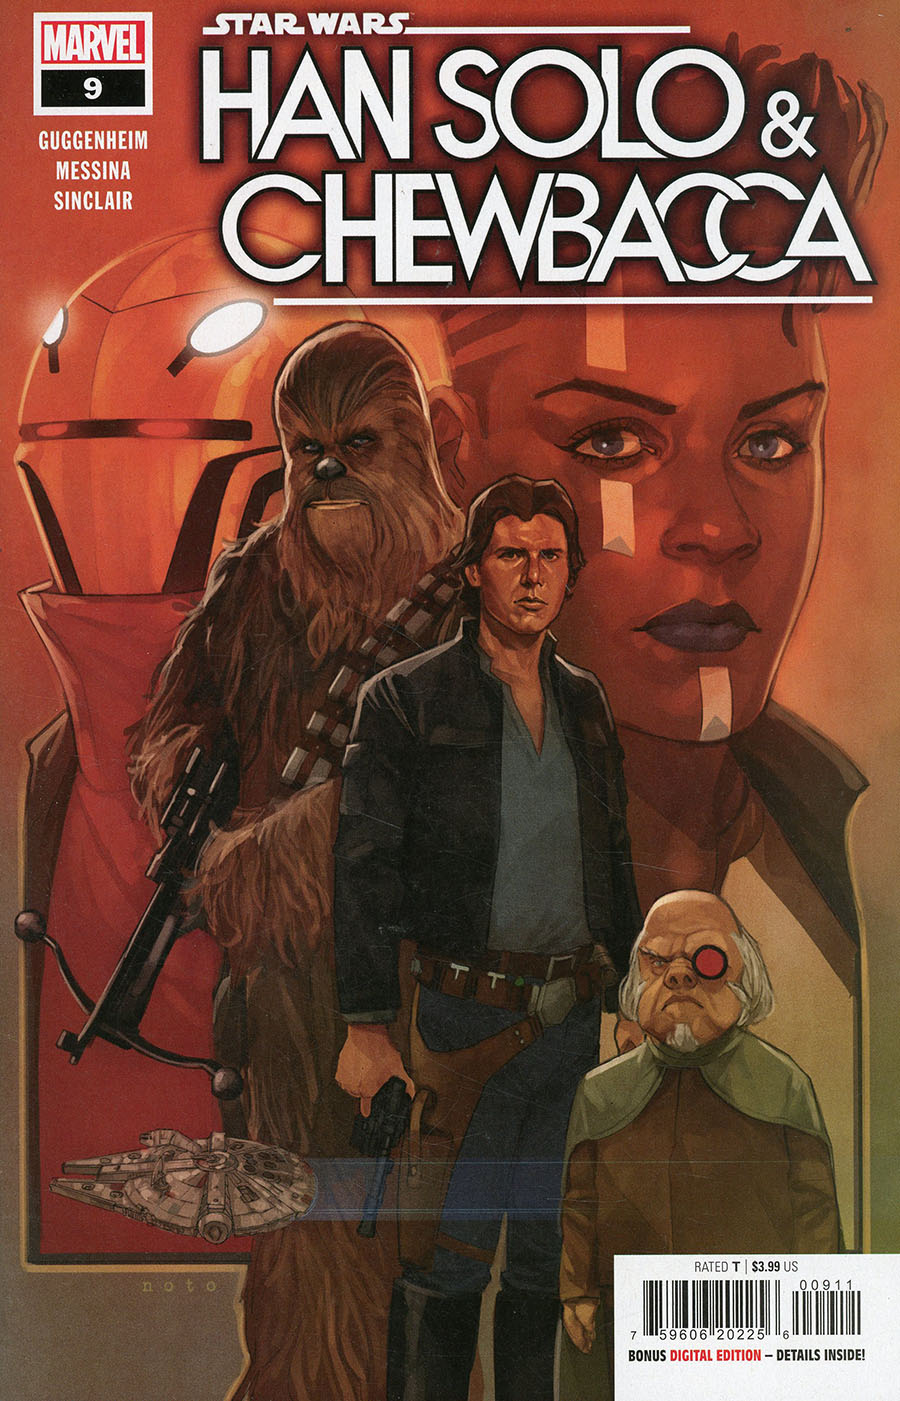 Star Wars Han Solo & Chewbacca #9 Cover A Regular Phil Noto Cover